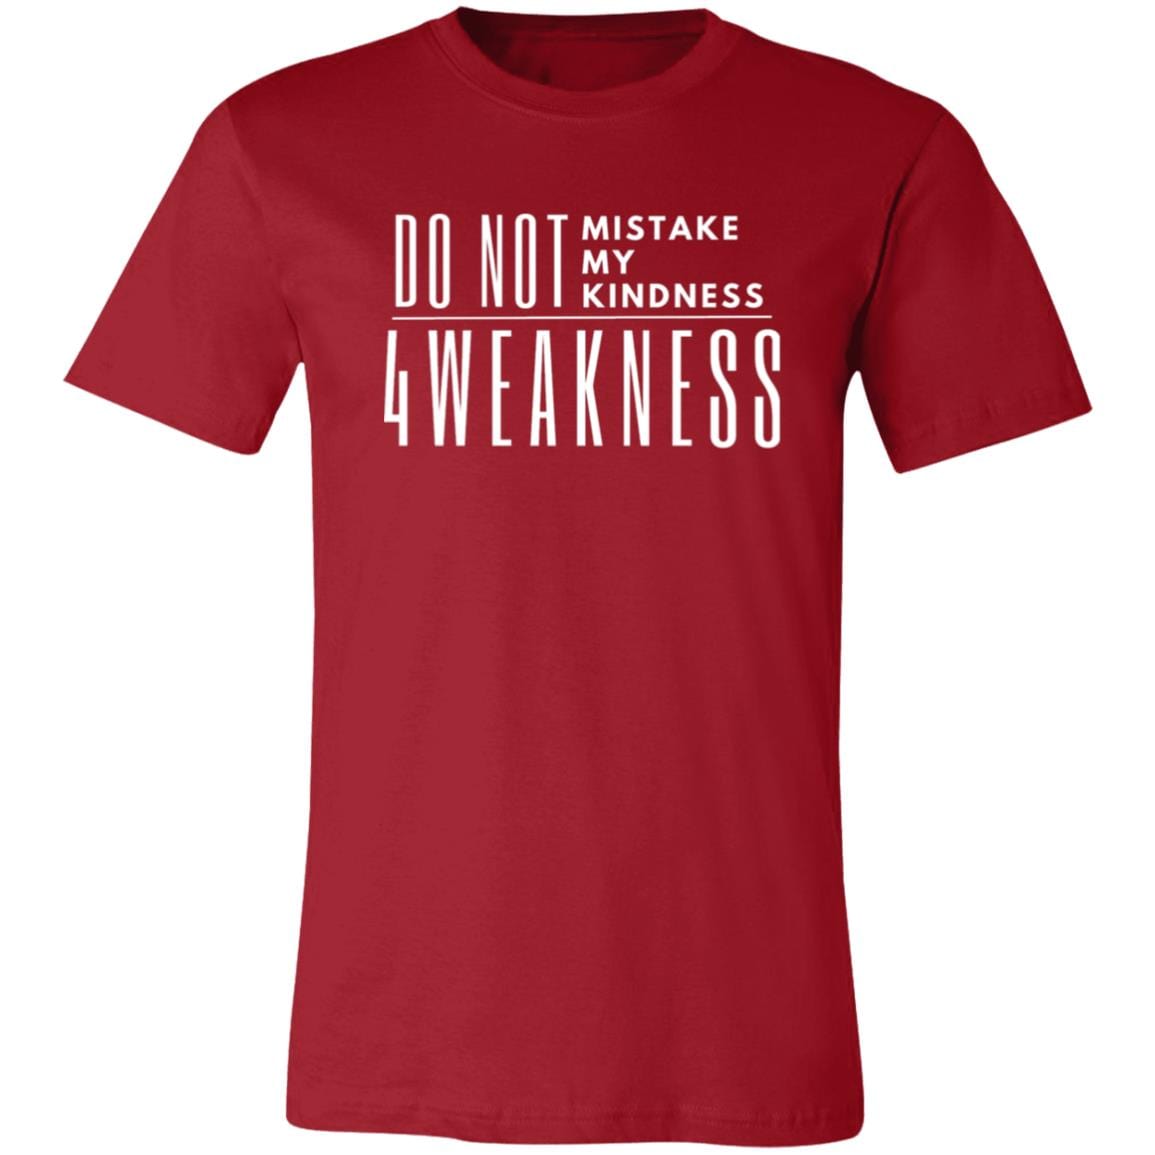 Don't Mistake My Kindness 4 weakness Comfiest Every Day TShirt